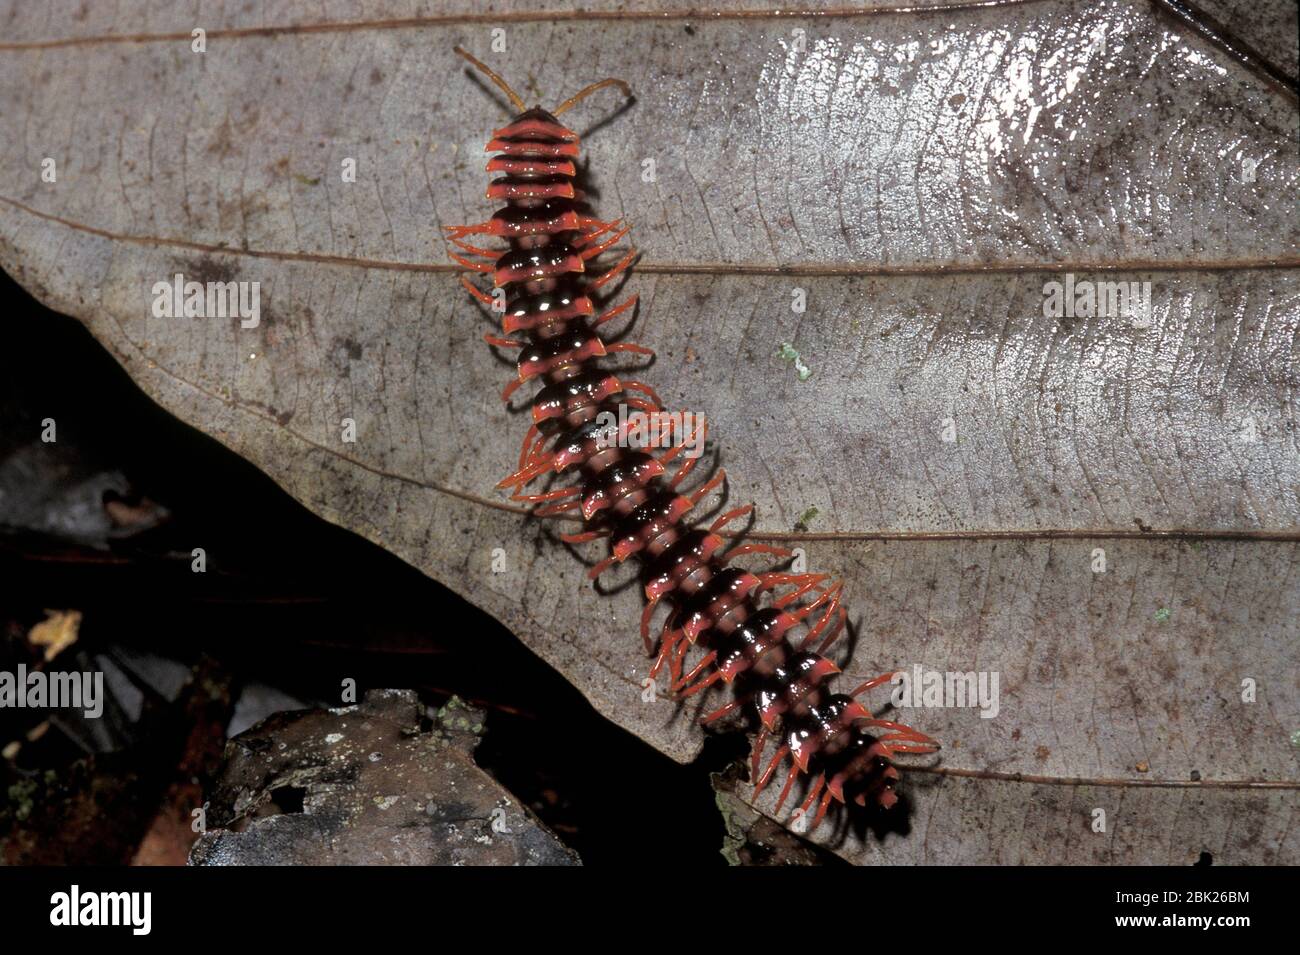 Flat Backed Millipede, Platyrhachus sp, Poring Hot Springs, Sabah, Borneo, showing red warning colouration Stock Photo